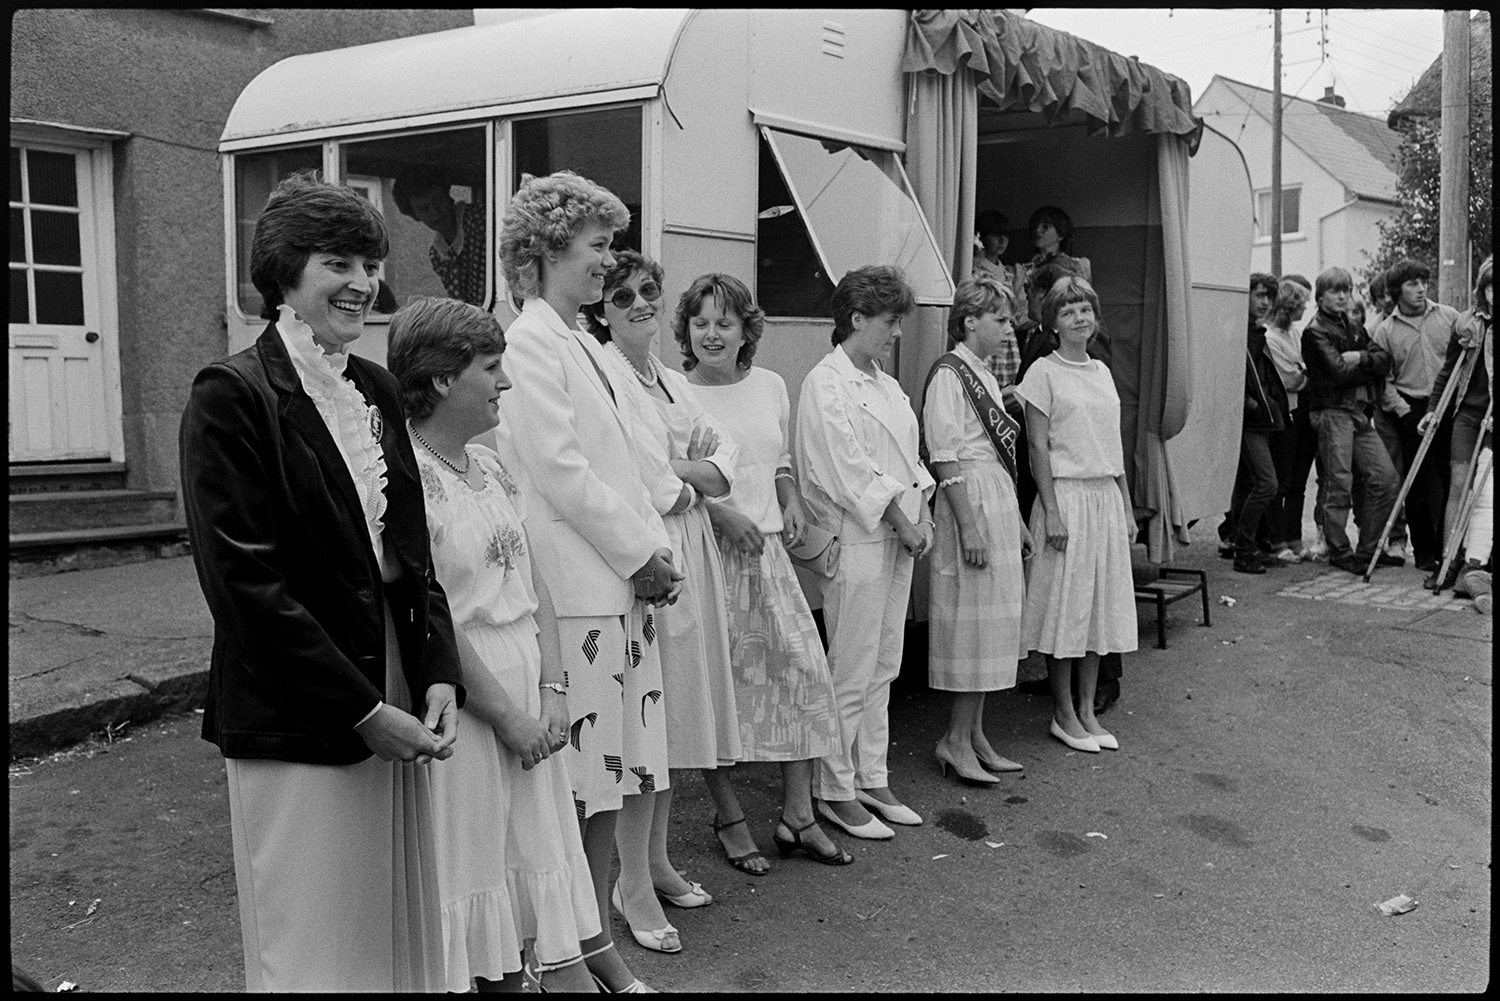 Fair Queen and attendants in village square, spectators waiting around. Photographer. 
[The Winkleigh Fair Queen, attendants and women stood outside a caravan in Winkleigh square which has been made into a stage.]